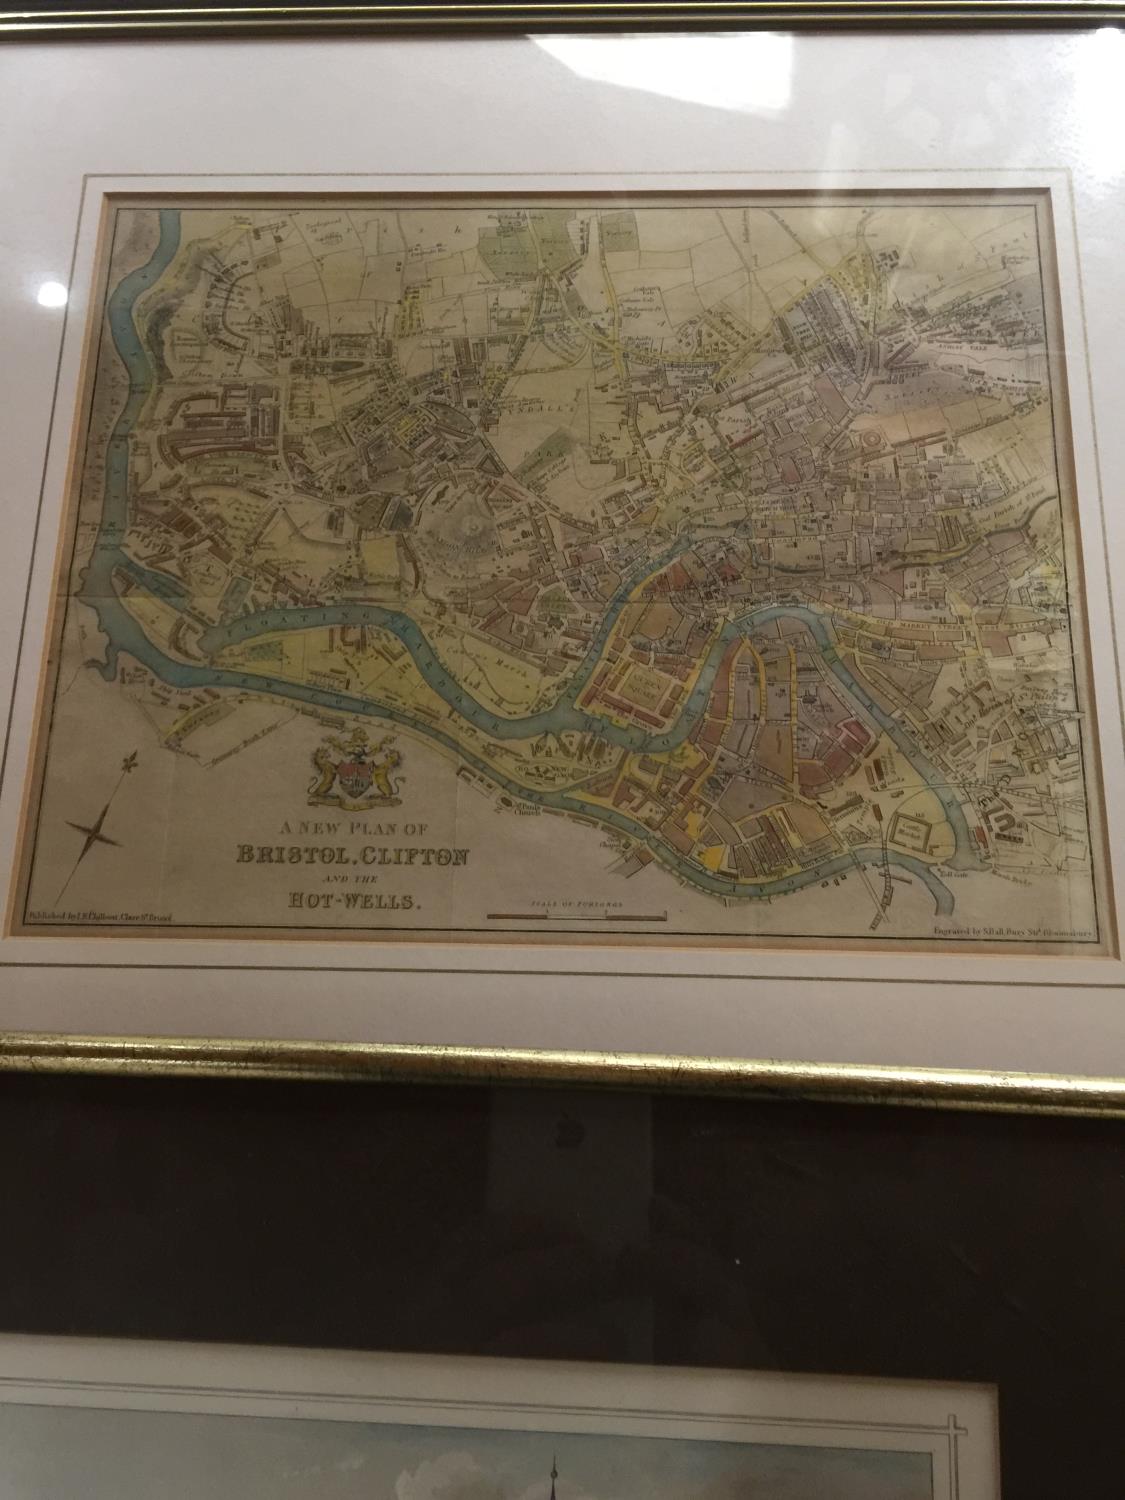 A FRAMED PRINT OF COLOGNE FROM THE NORTH WESTSIDE AND A FRAMED PRINT OF A MAP OF BRISTOL, CLIFTON - Image 2 of 3